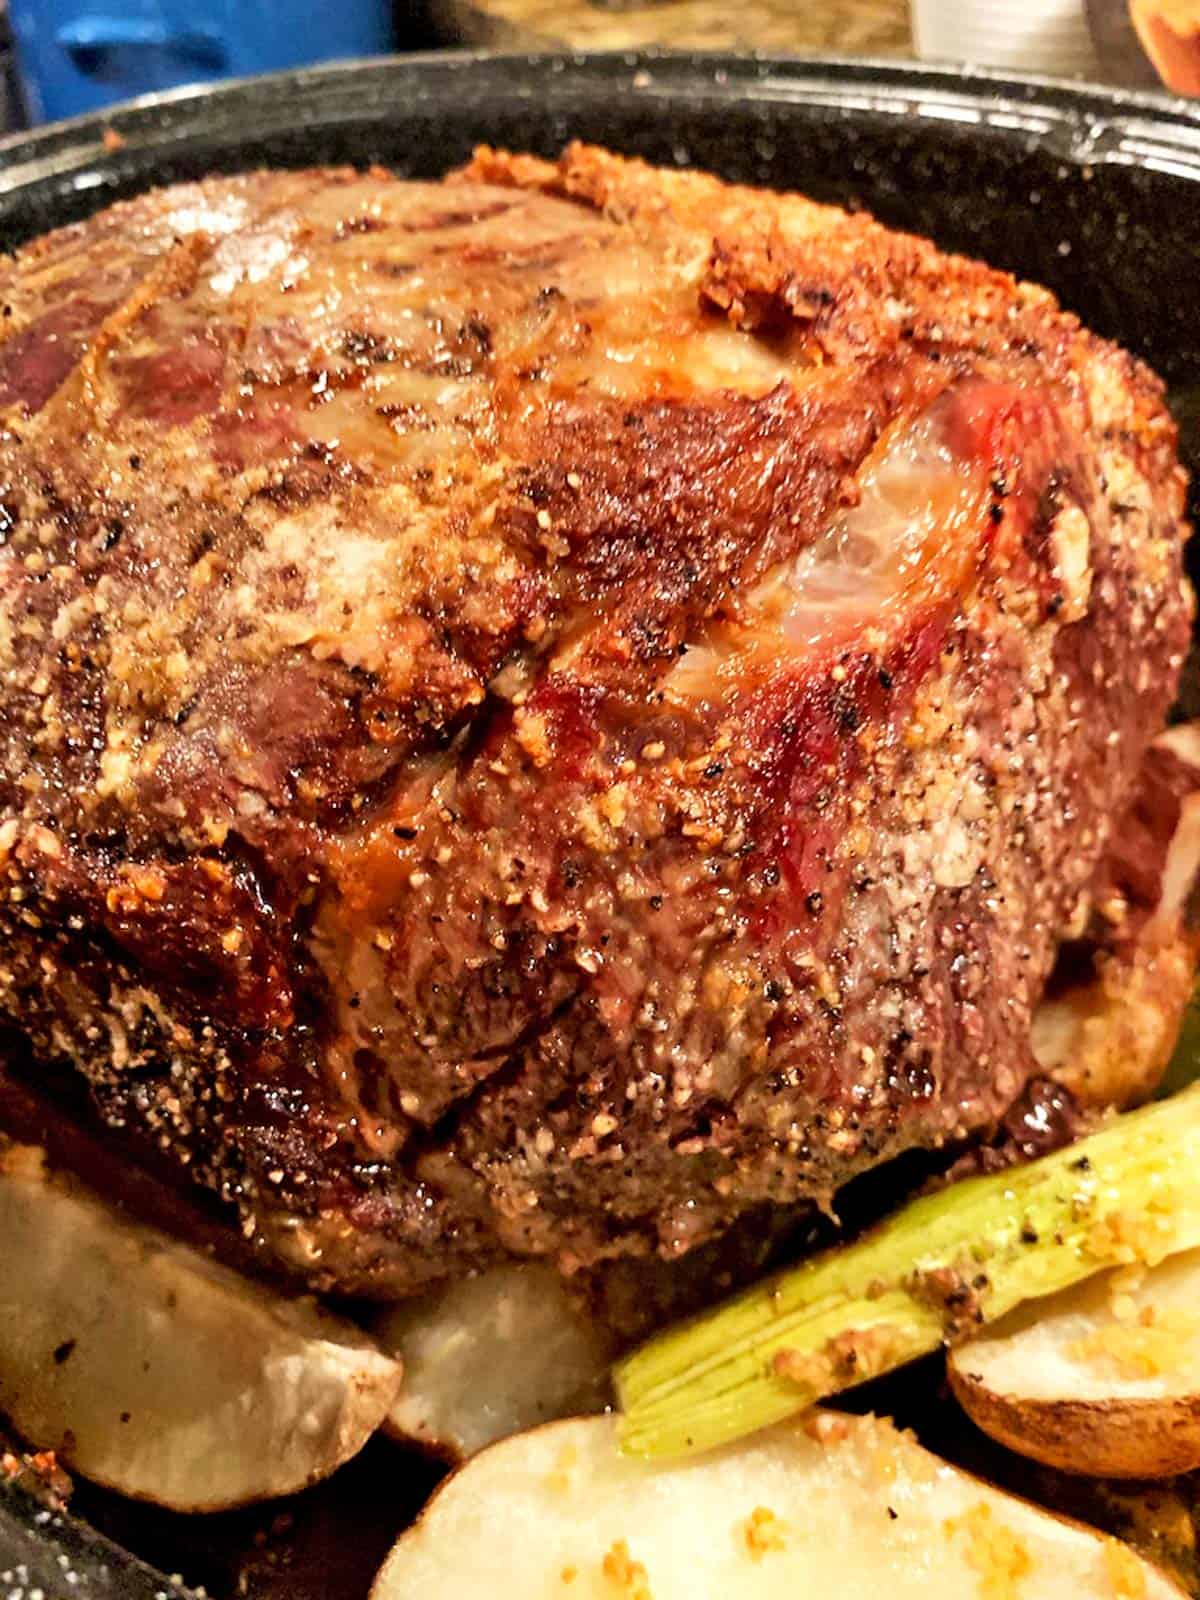 A finished beef roast sitting in a roaster on top of celery and potatoes.